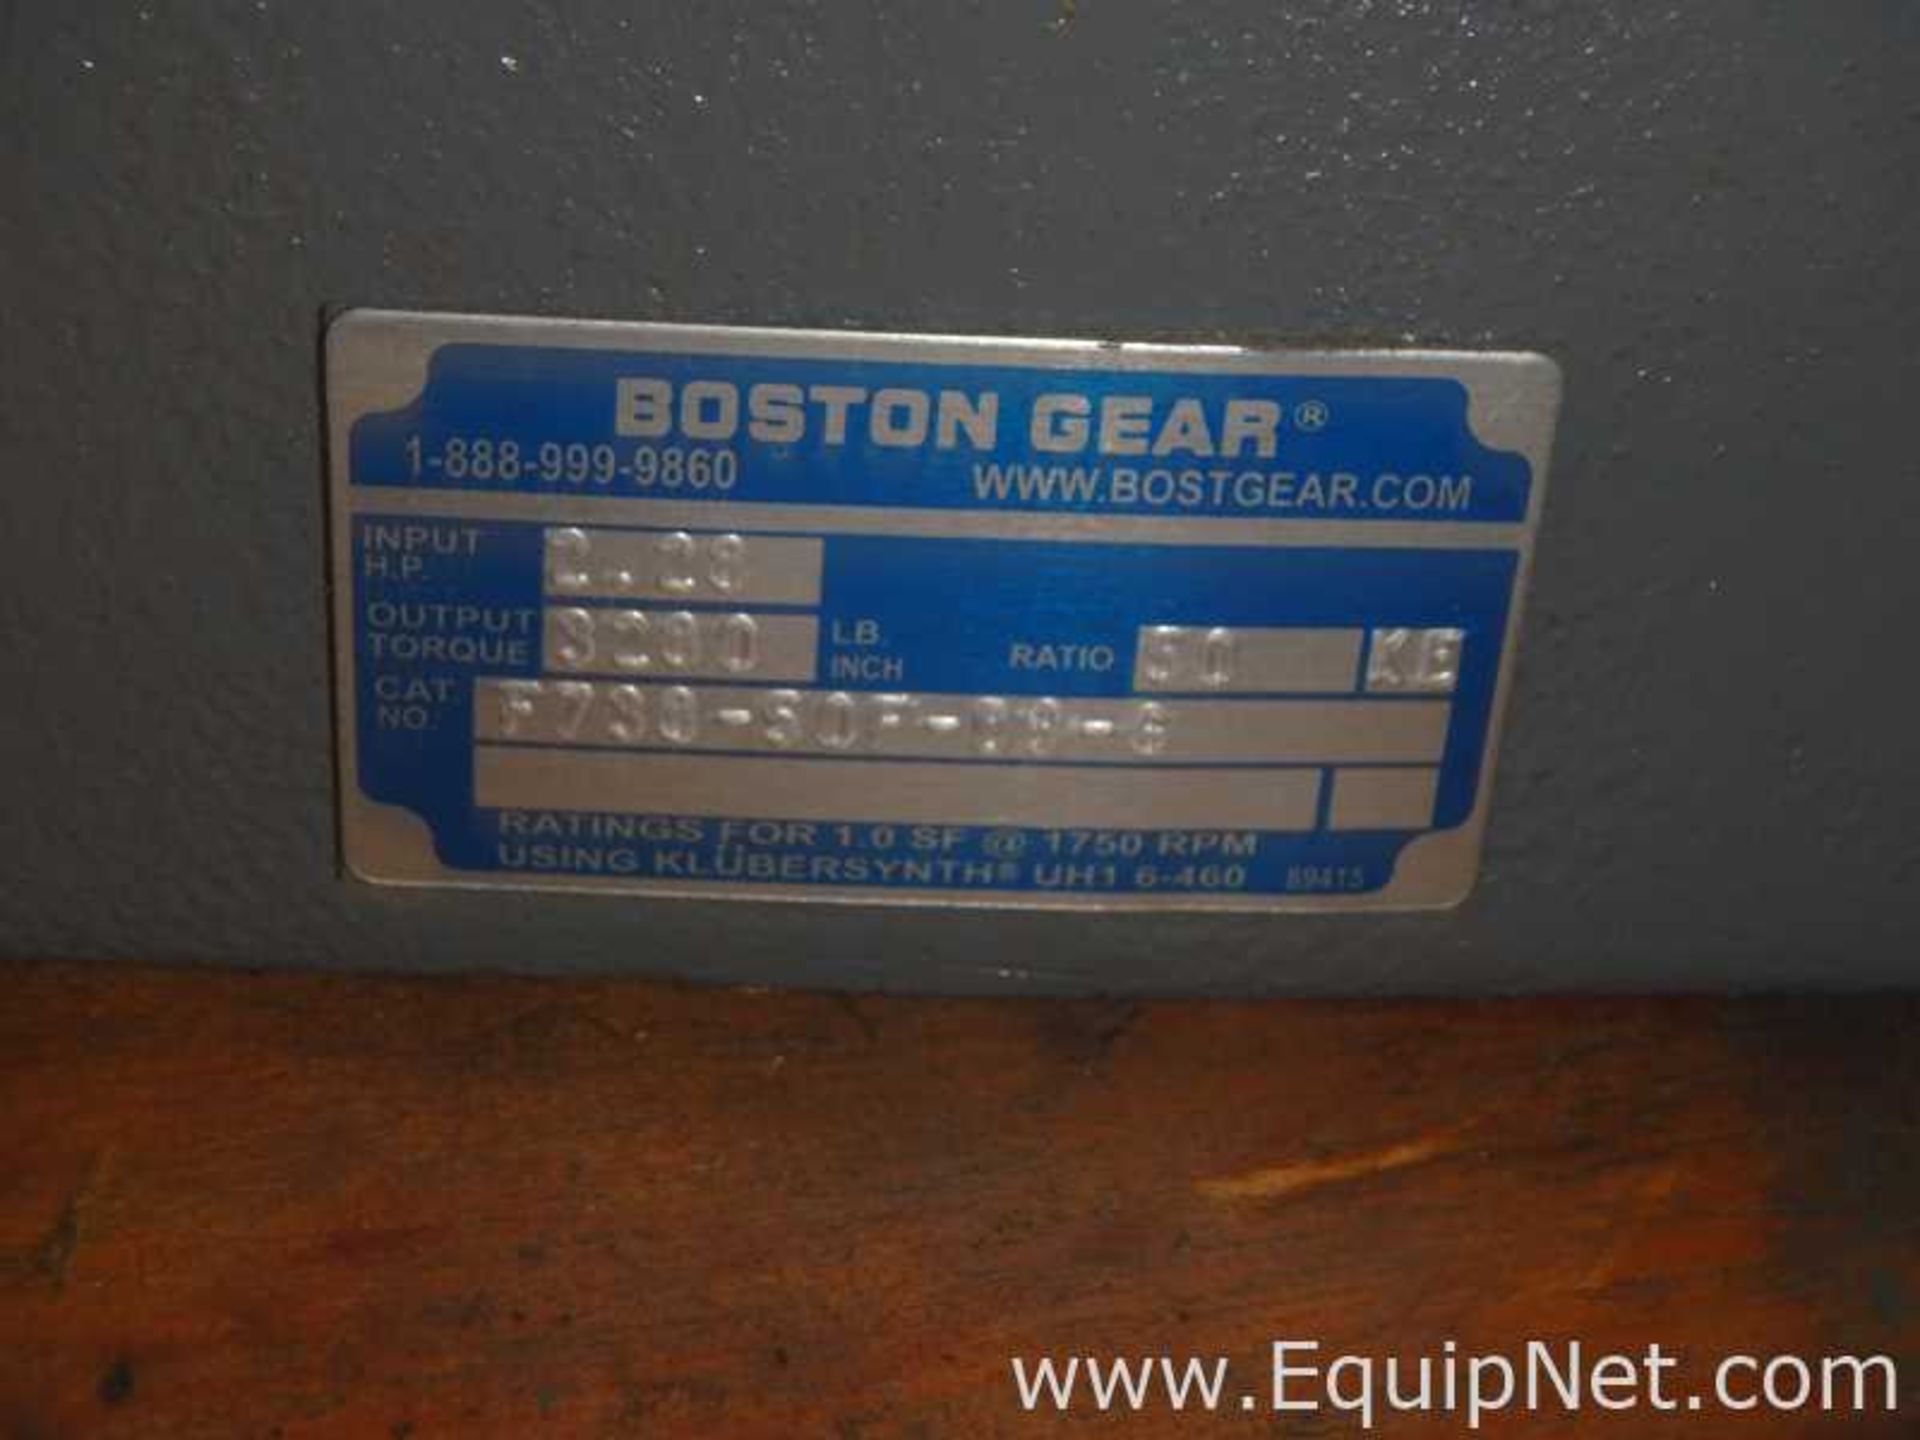 Lot of 2 Boston Gear F738-50F-89-6 50 to 1 Unused Gearboxes - Image 5 of 6